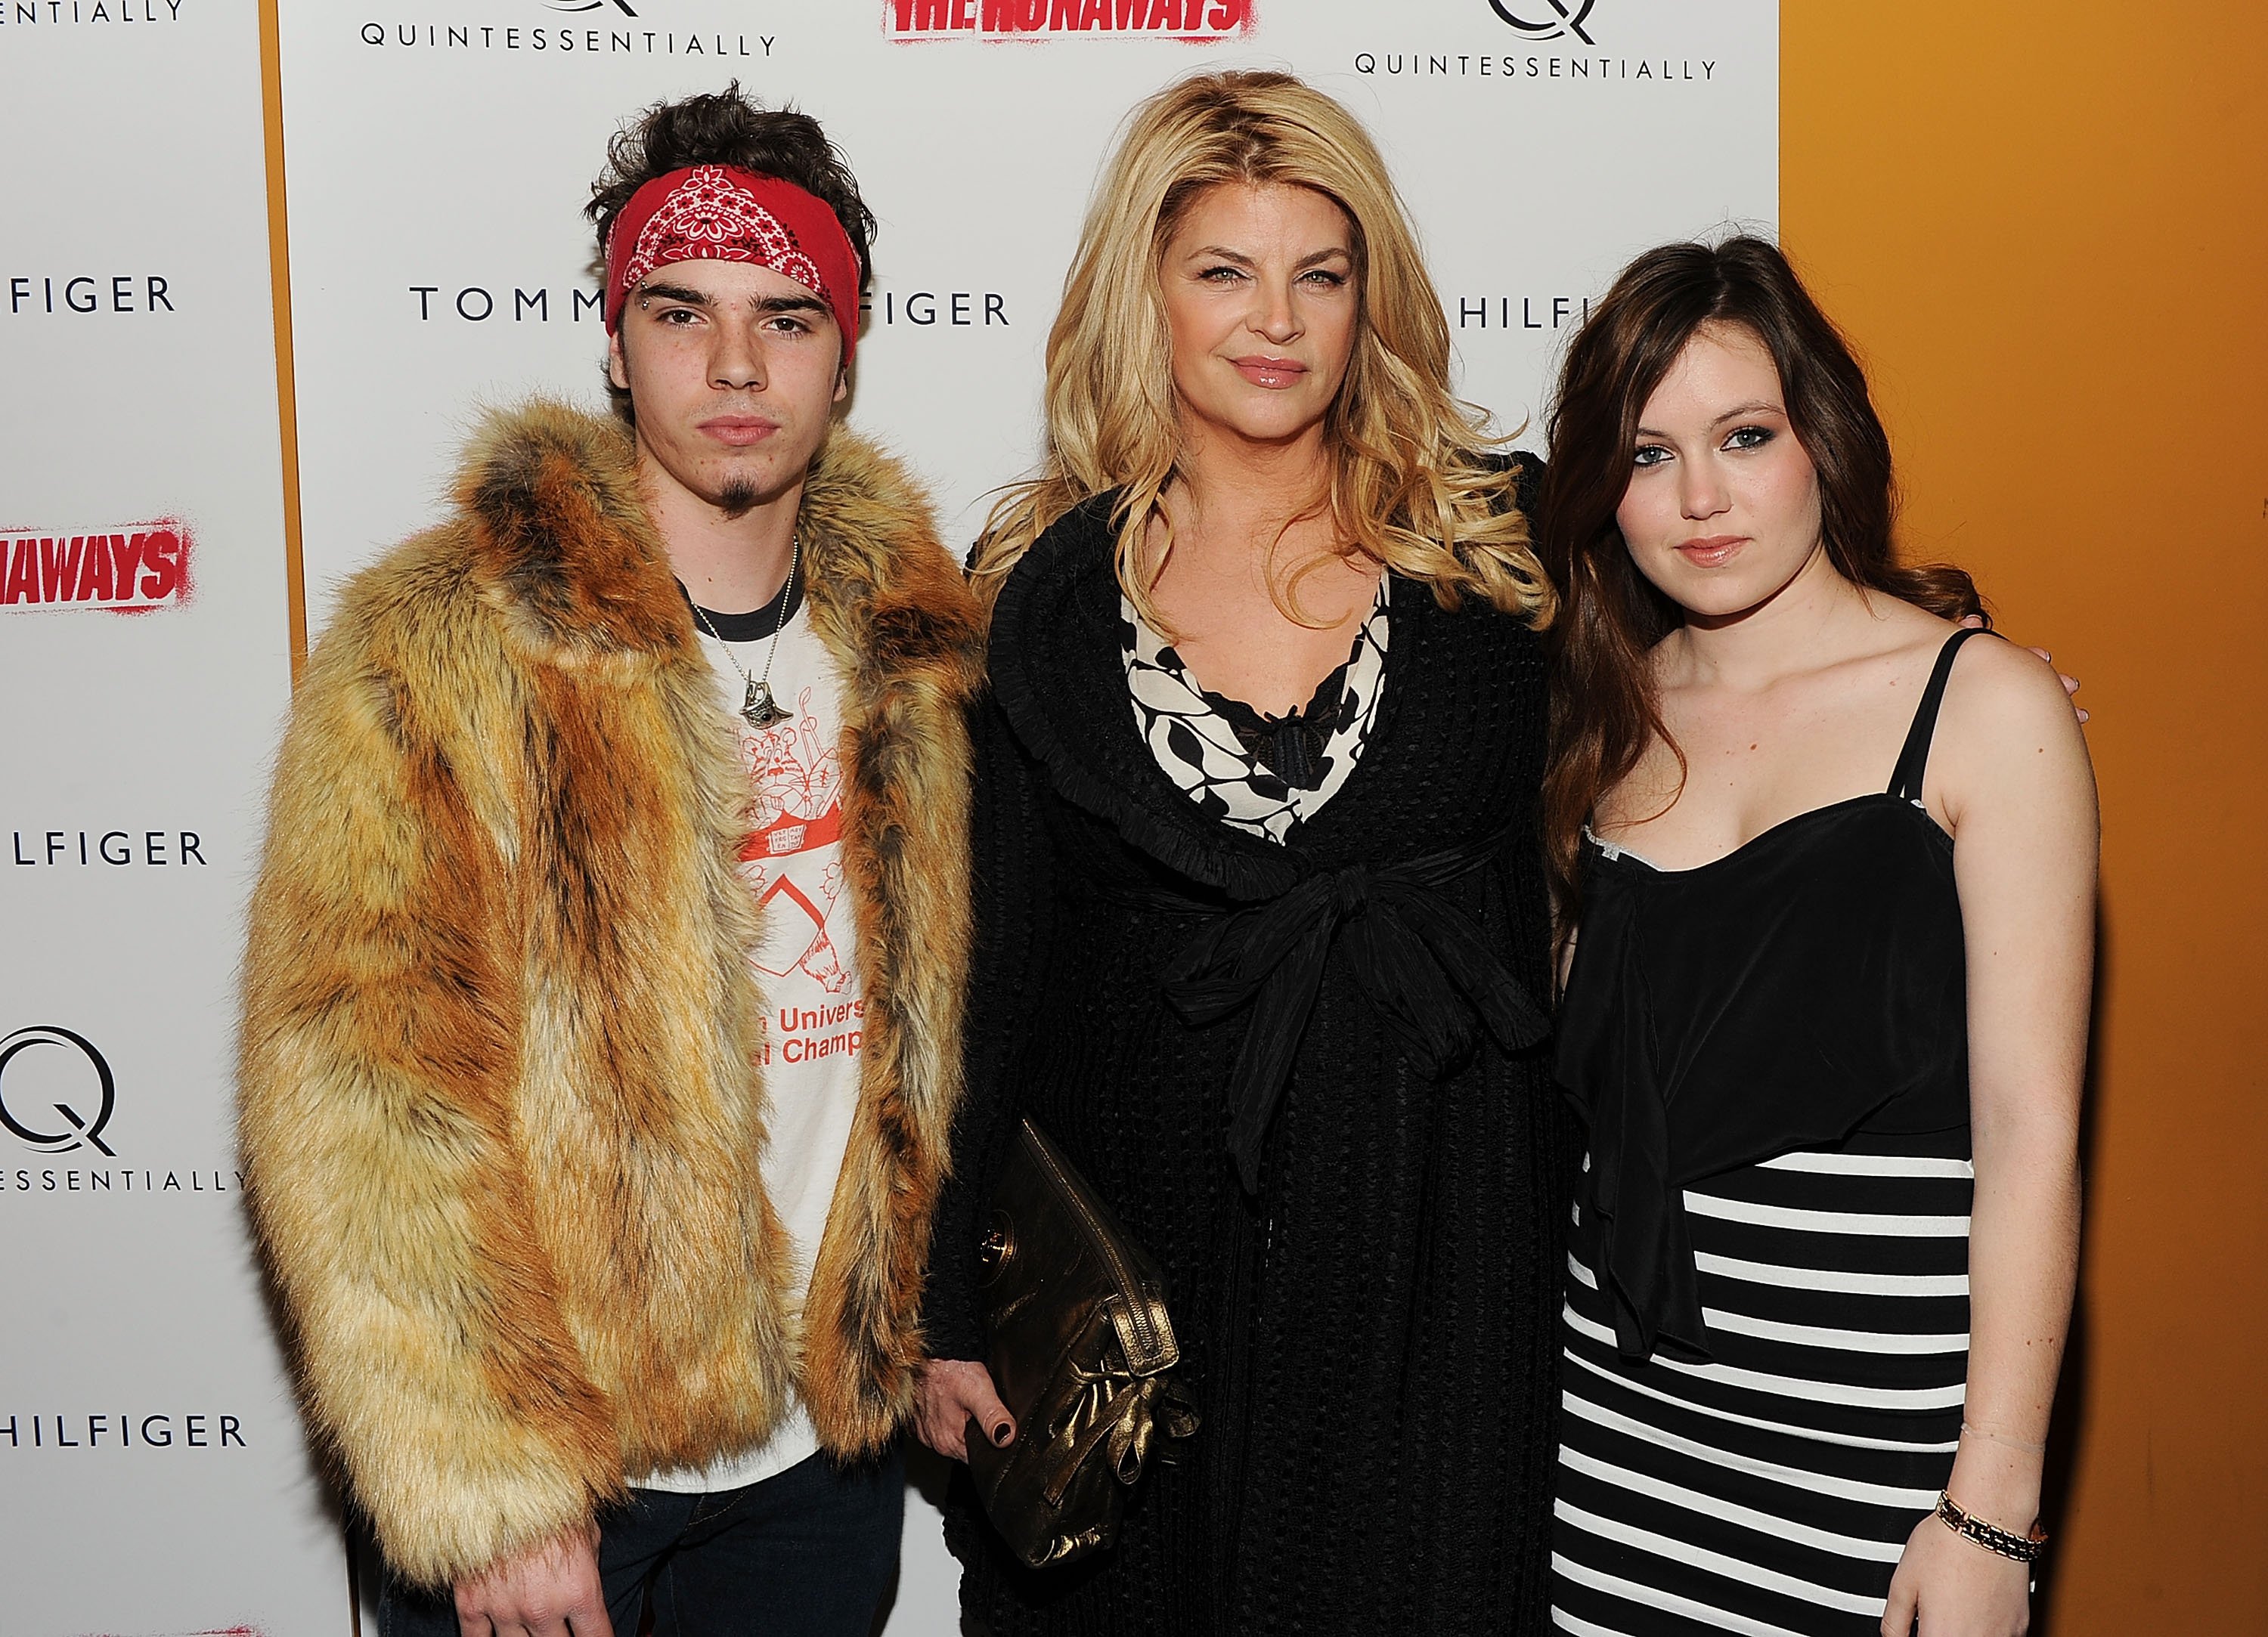 Kirstie Alley with children William True and Lillie Price Stevenson at the "The Runaways" New York premiere at Landmark Sunshine Cinema on March 17, 2010 in New York City. | Source: Getty Images